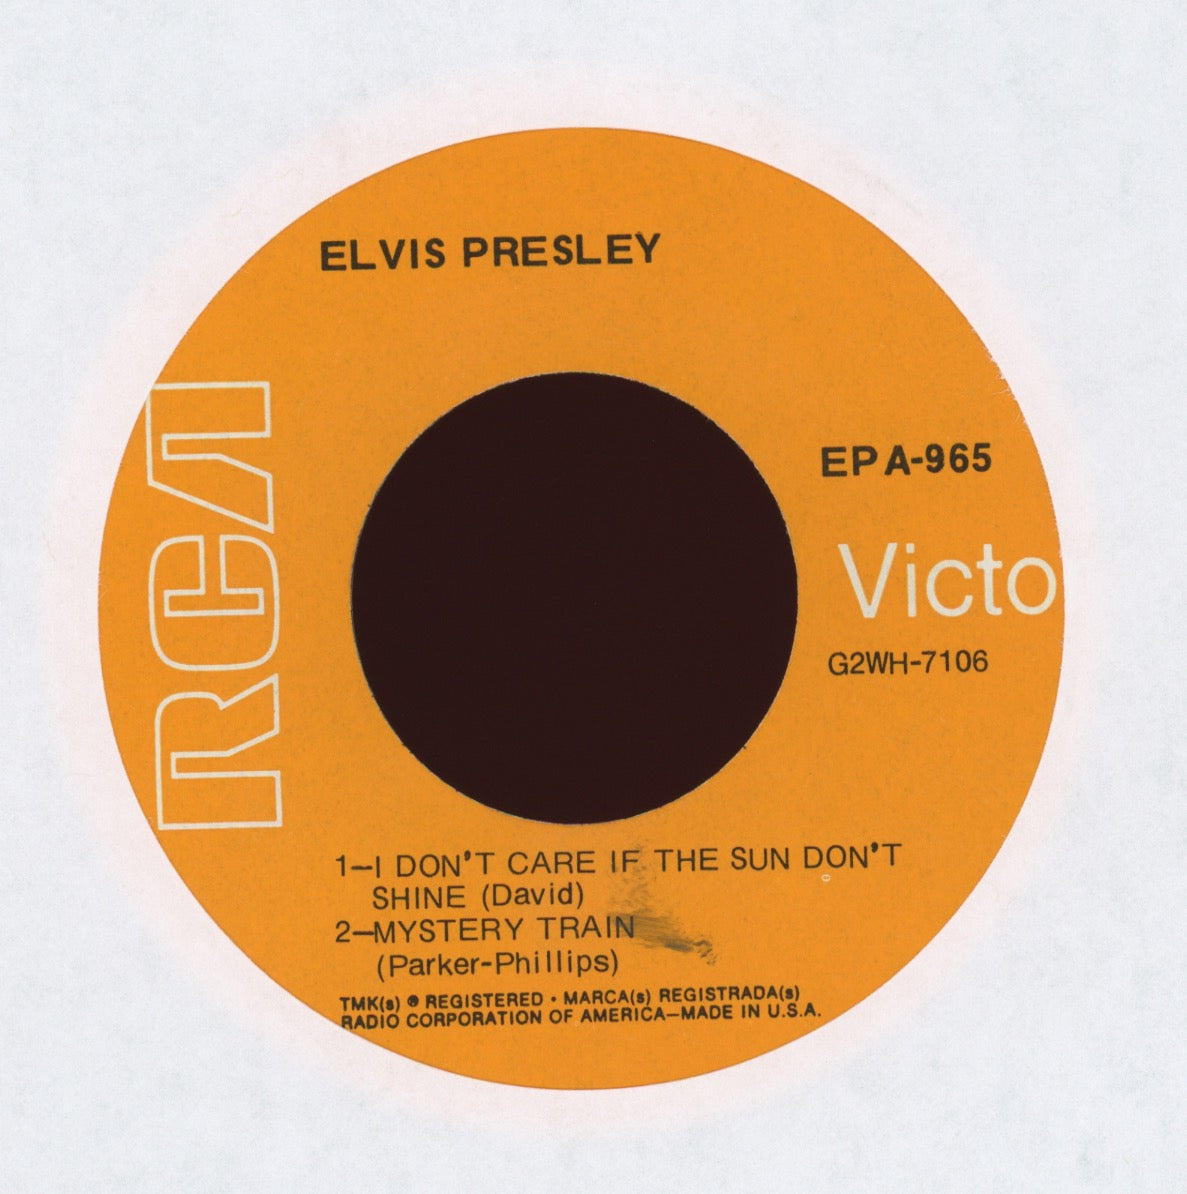 Elvis Presley - Any Way You Want Me on RCA EPA 965 Rare Orange Label EP 45 With Cover